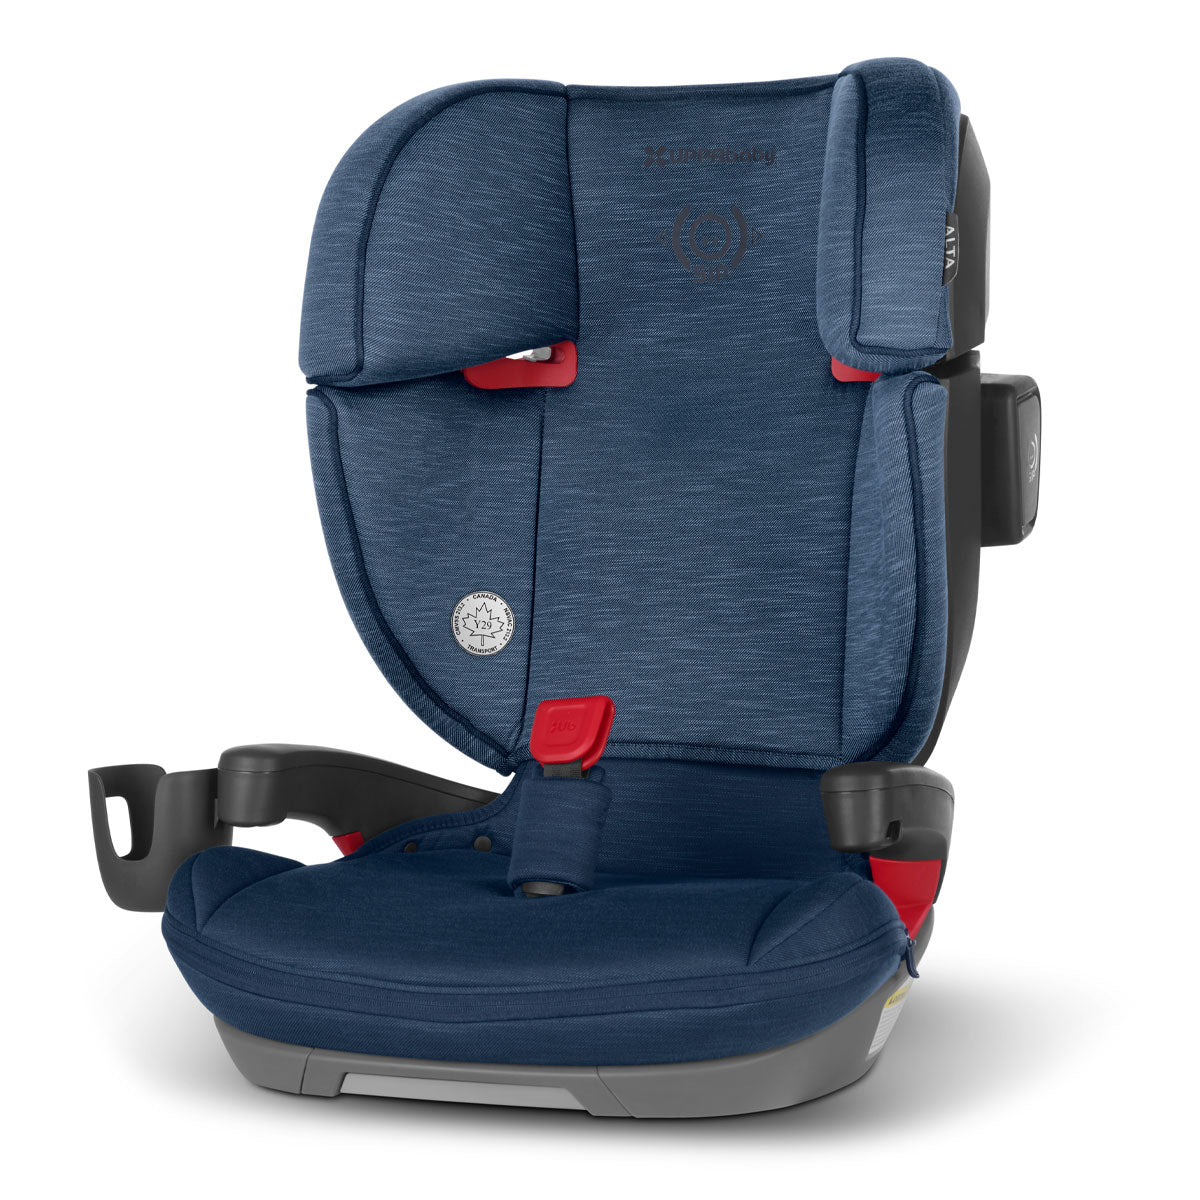 Noa - UPPAbaby ALTA Full-Back Booster Seat